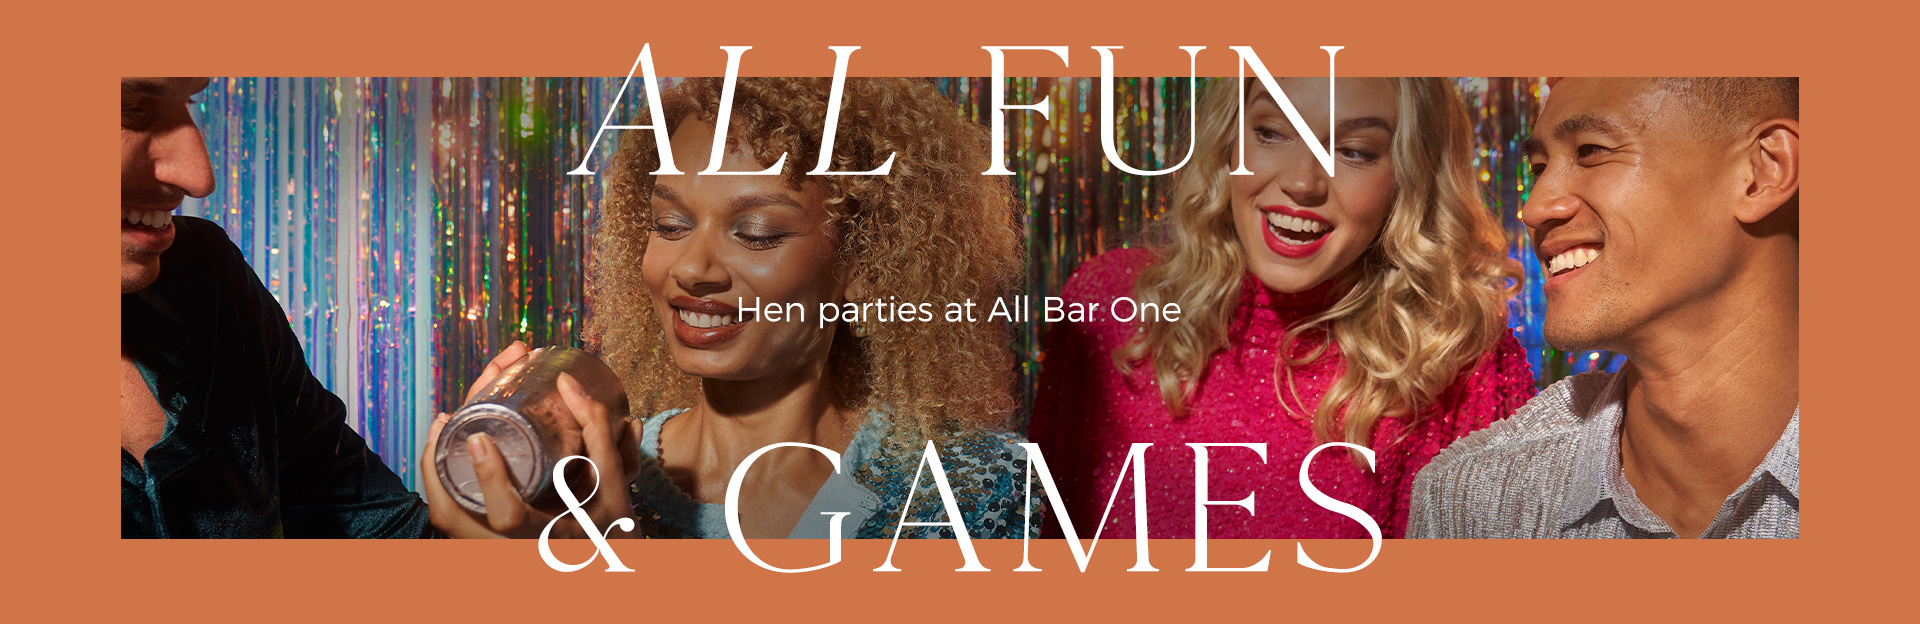 Hen parties at All Bar One Reading